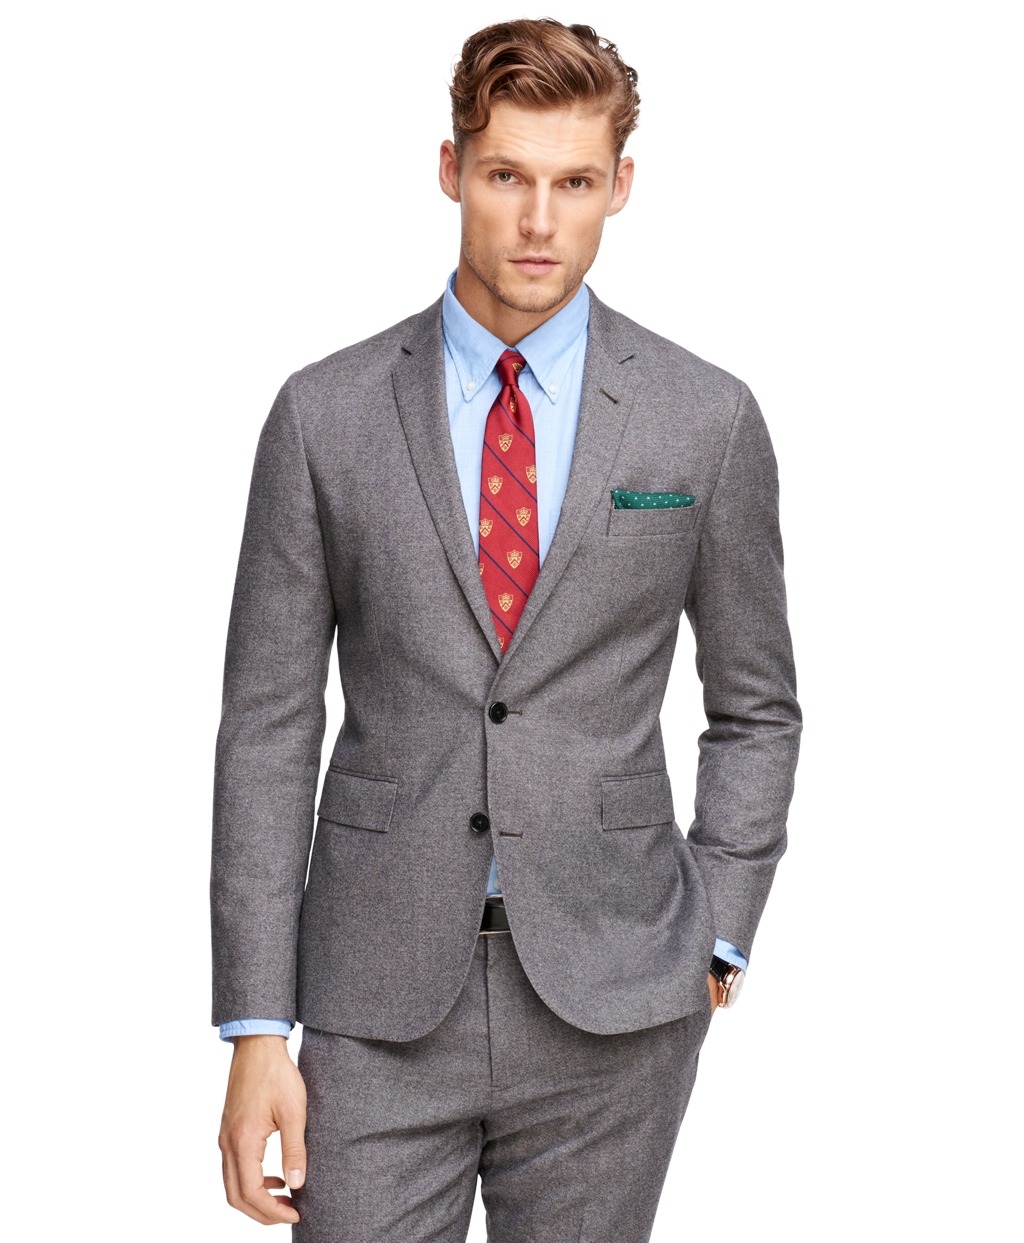 One Day Sale at Brooks Brothers: 30% Off for... | This Fits - Menswear ...